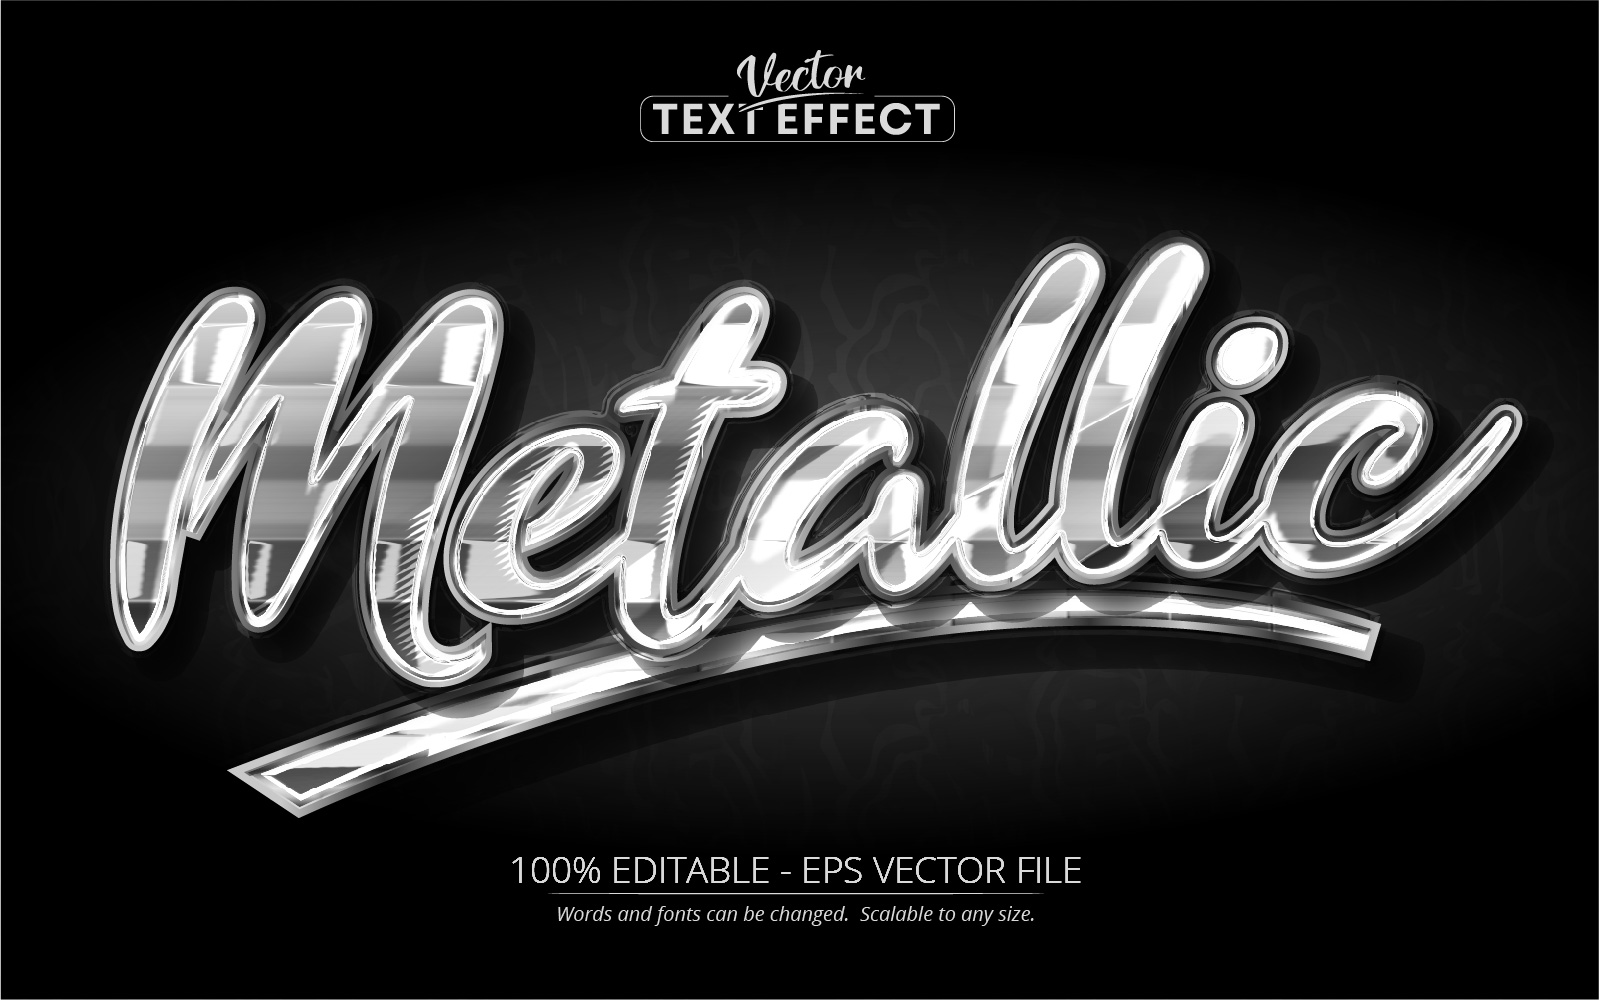 Metallic - Editable Text Effect, Black Metal And Silver Text Style, Graphics Illustration